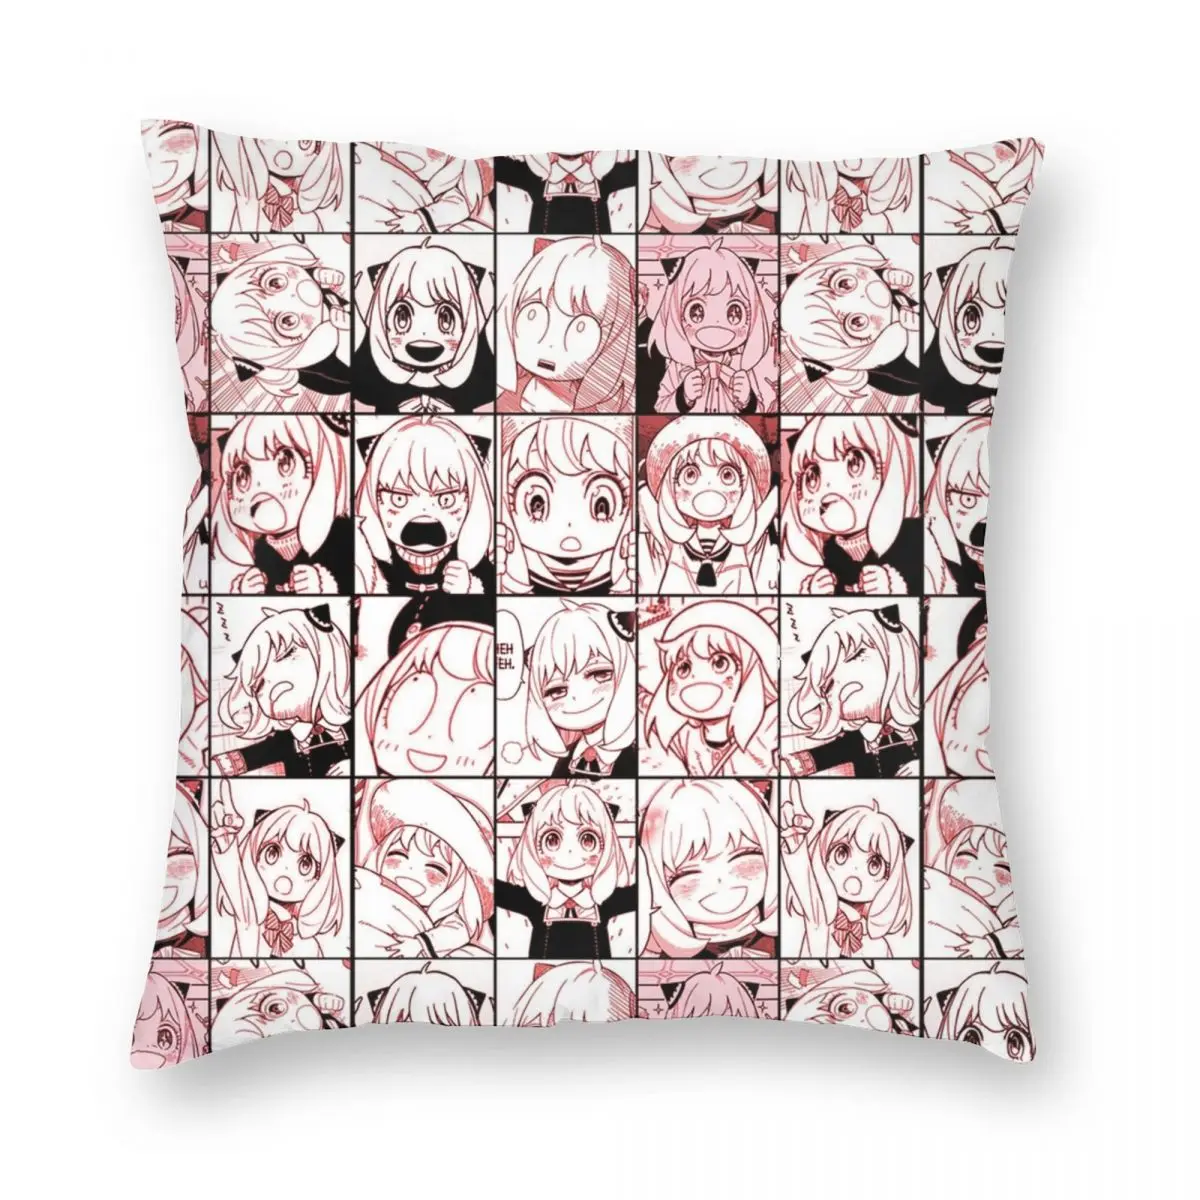 

Anya Forger Spy X Family Manga Panels Collage Pillowcase Double-sided Printing Cushion Cover Decor Pillow Case Cover Home 45X45